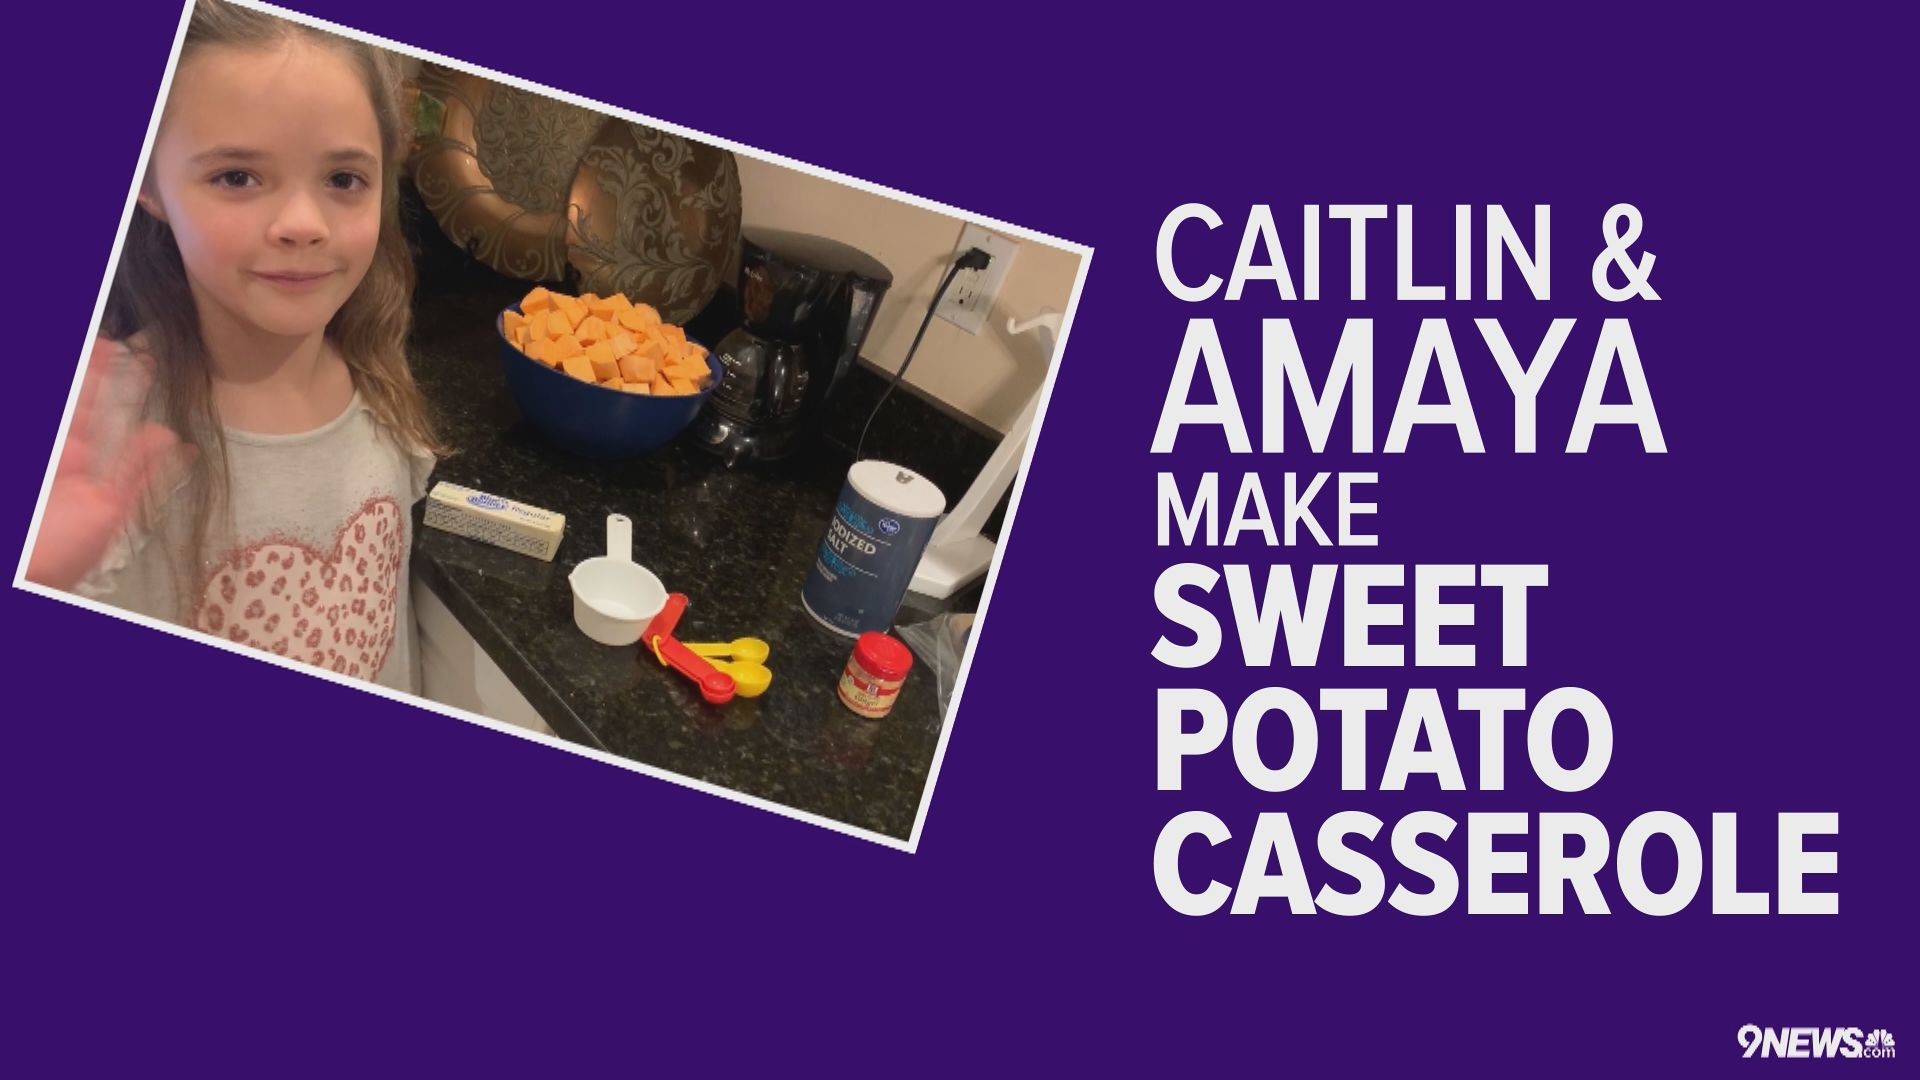 9NEWS E.P. of Digital Caitlin Hendee and her 9-year-old daughter Amaya show you how to make a simple, tasty sweet potato casserole dish that will wow at Thanksgiving